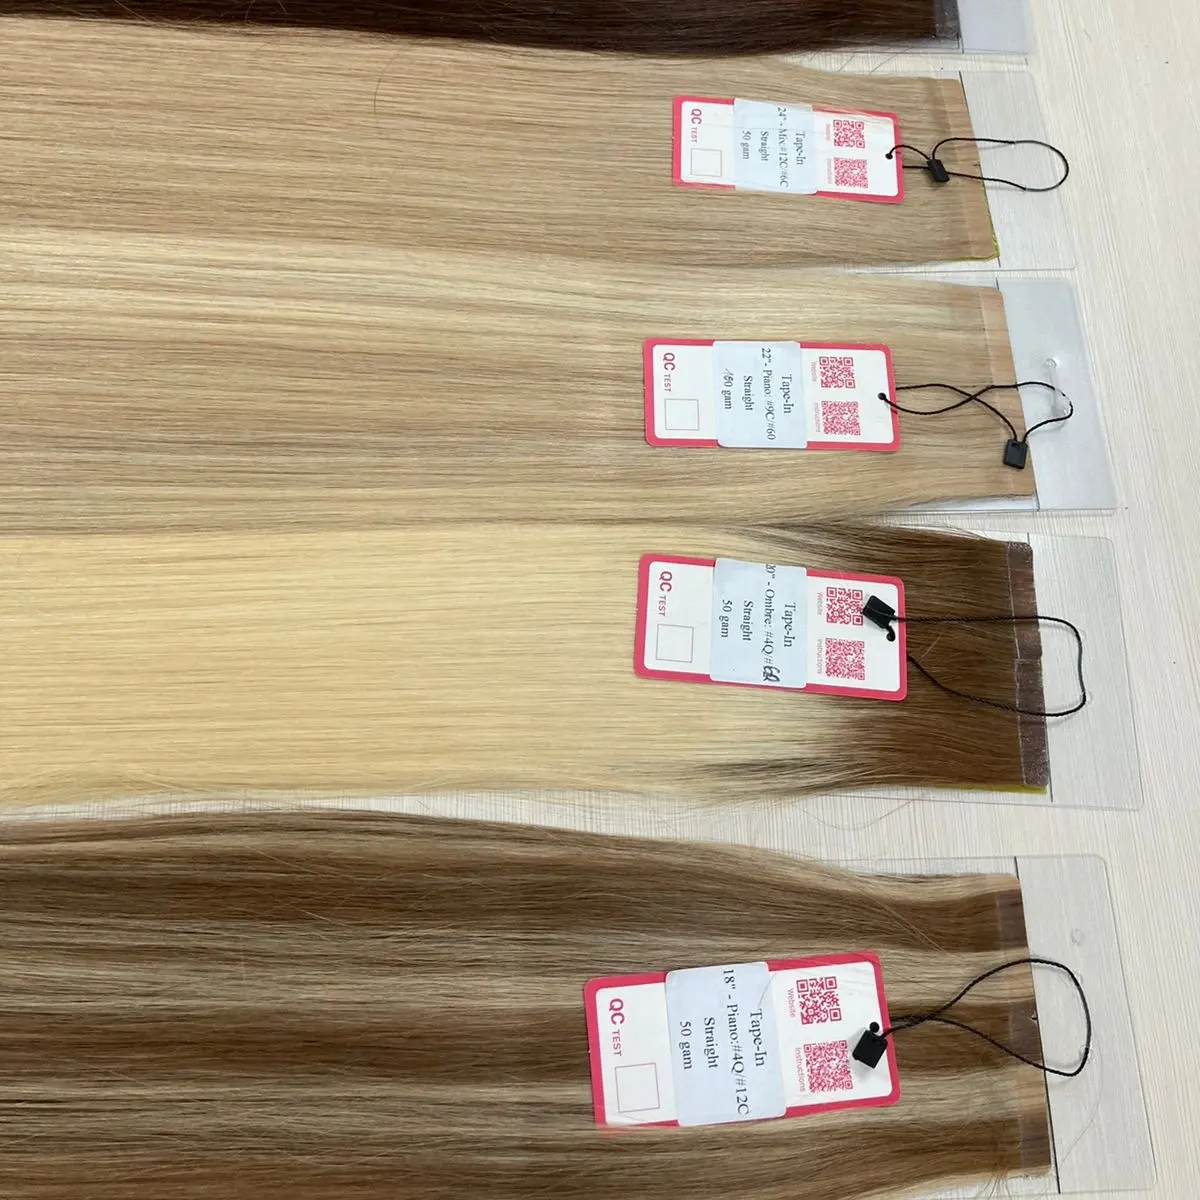 100% wholesale tape hair extensions european remy STRAIGHT WAVY CURLY ALL SIZES AND COLORS VIRGIN